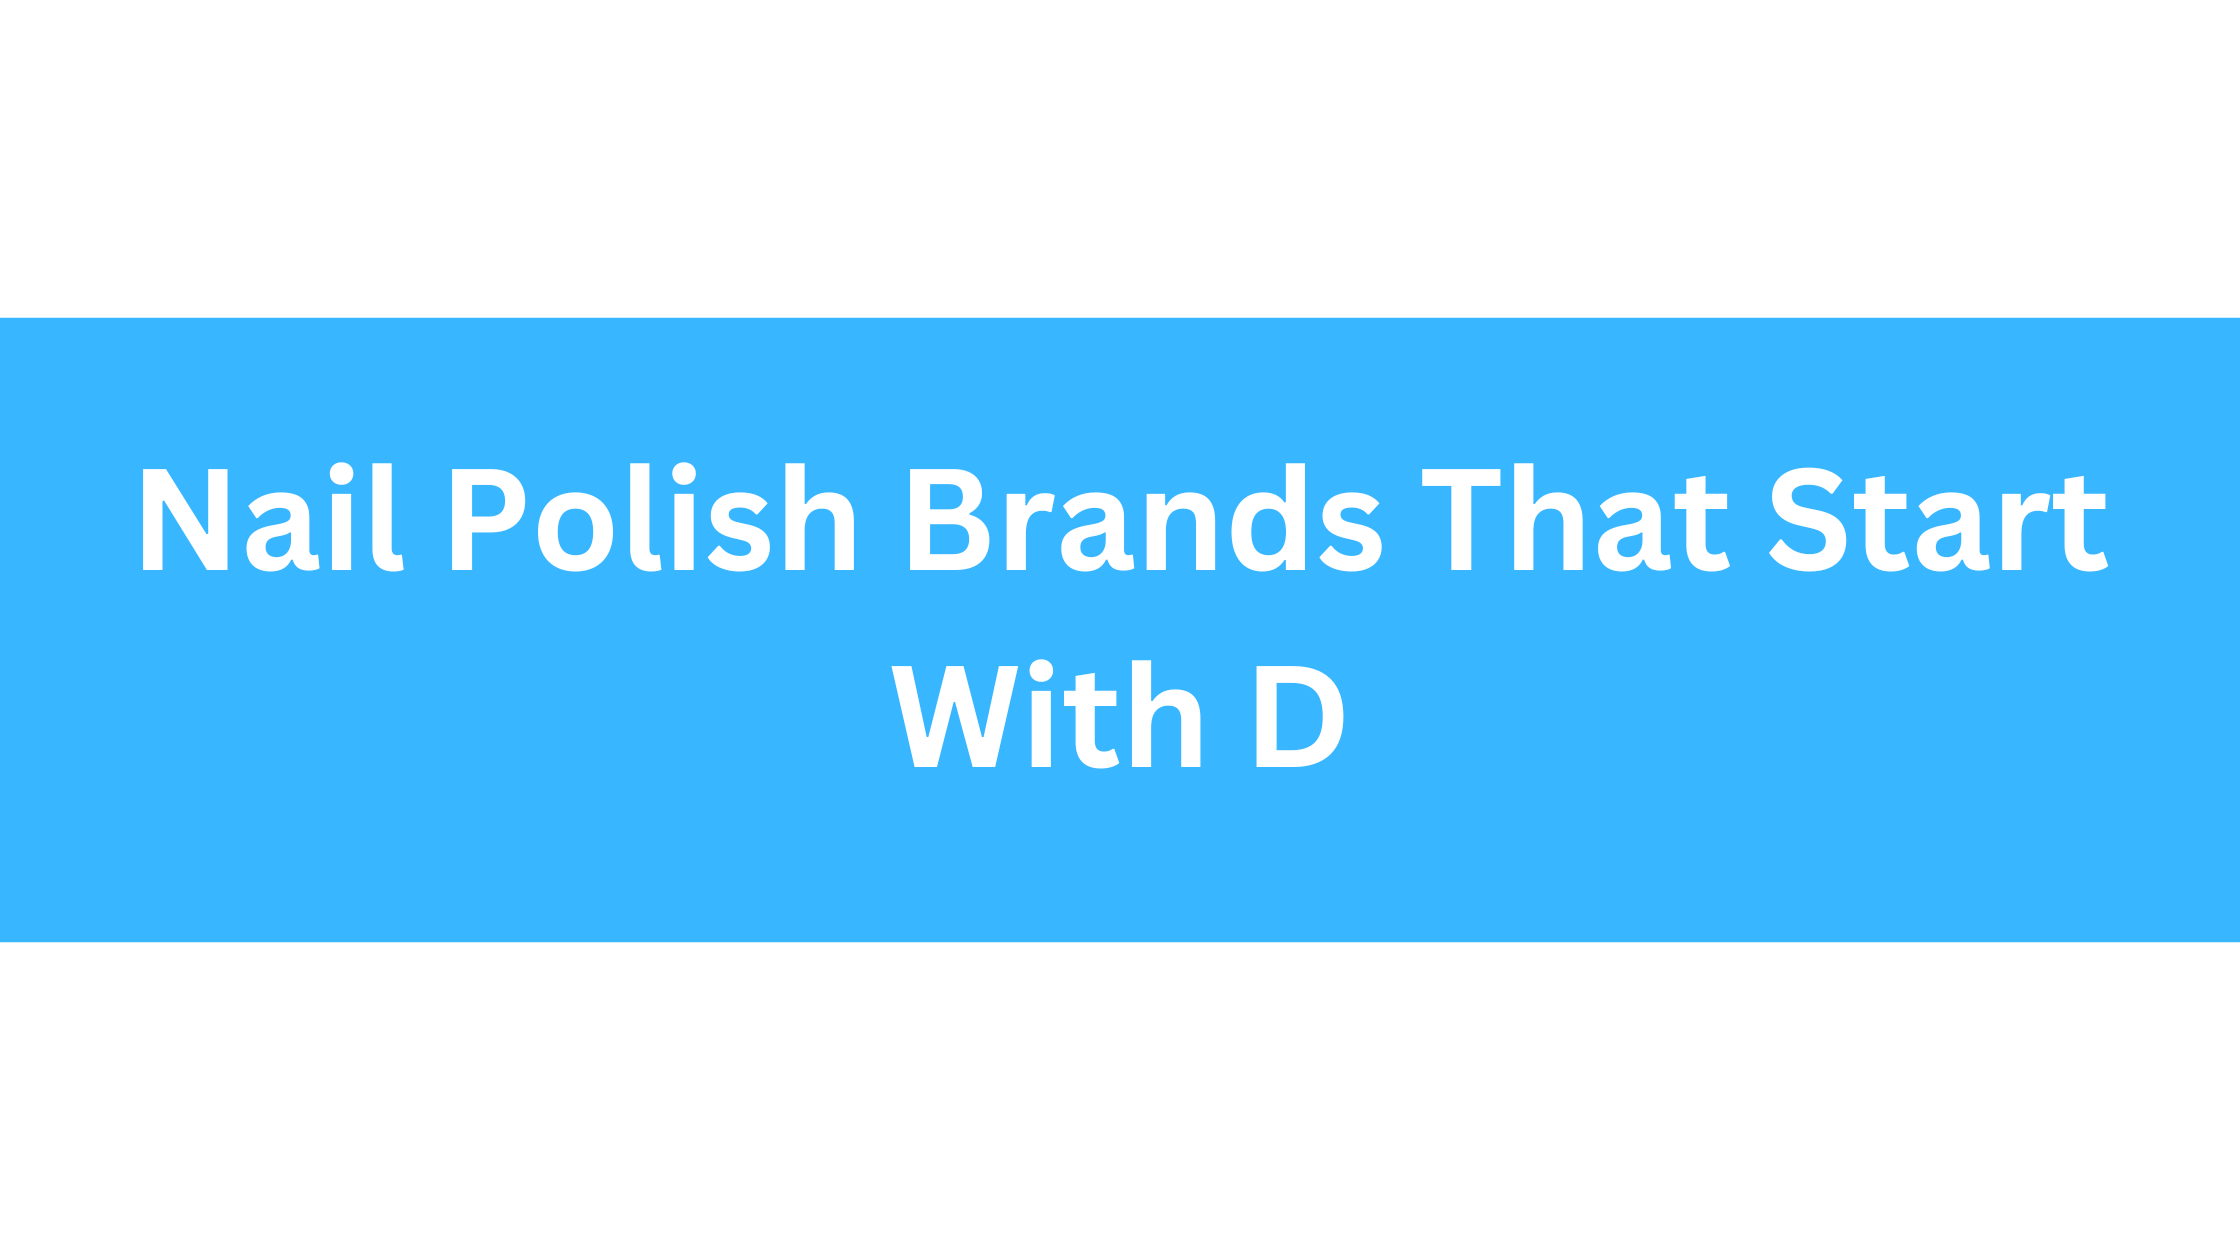 Nail Polish Brands That Start With D